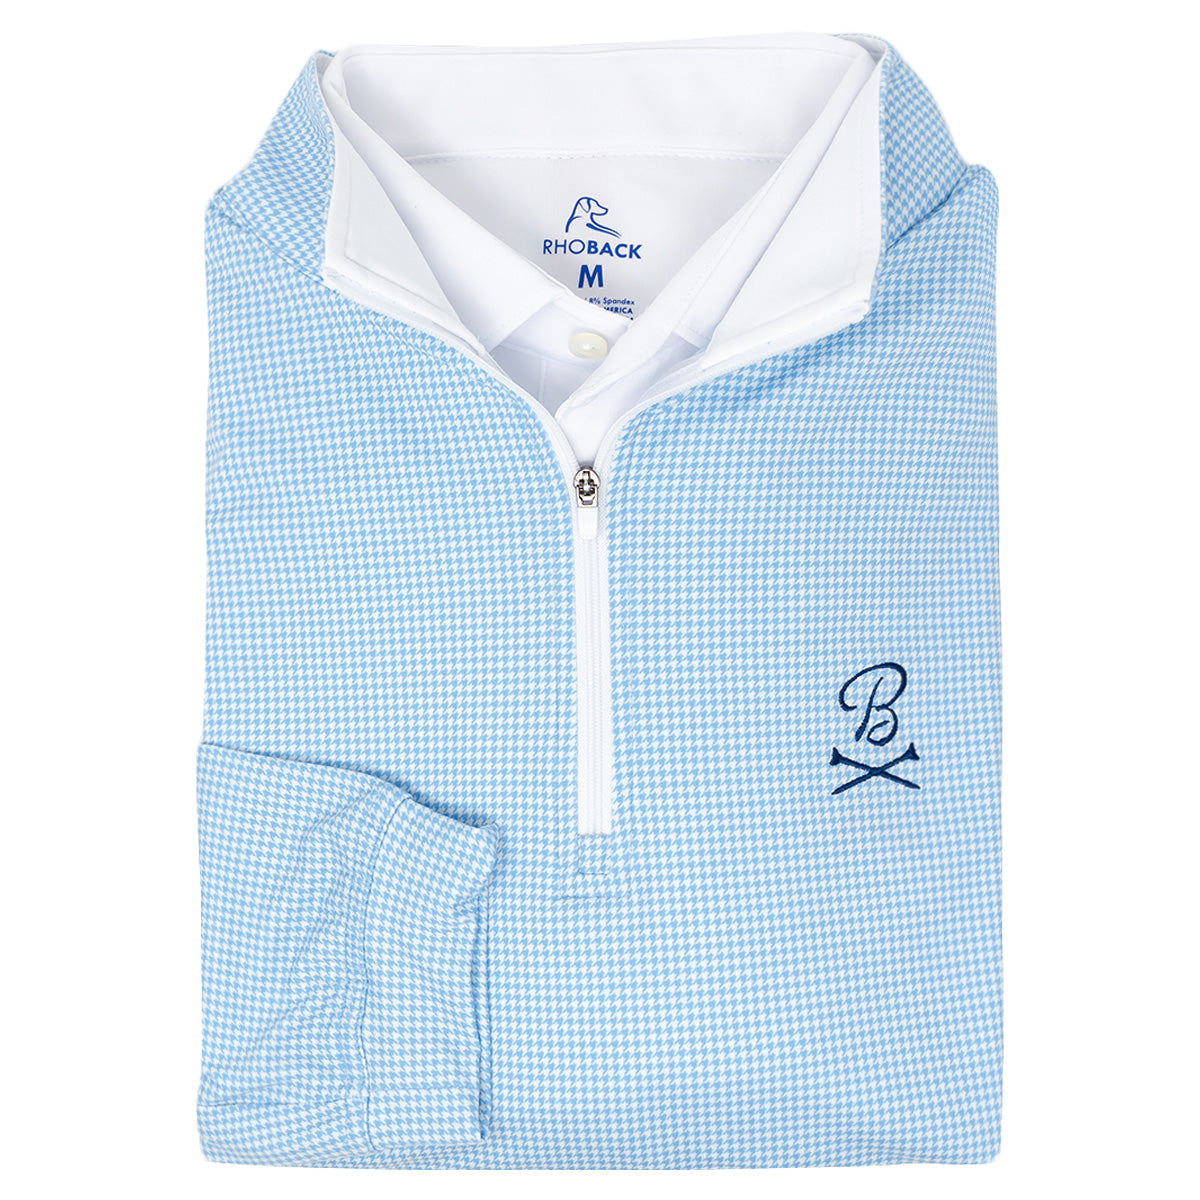 Rhoback x Barstool Golf "The Half Moon" Quarter Zip-Pullovers-Fore Play-Light Blue-S-Barstool Sports